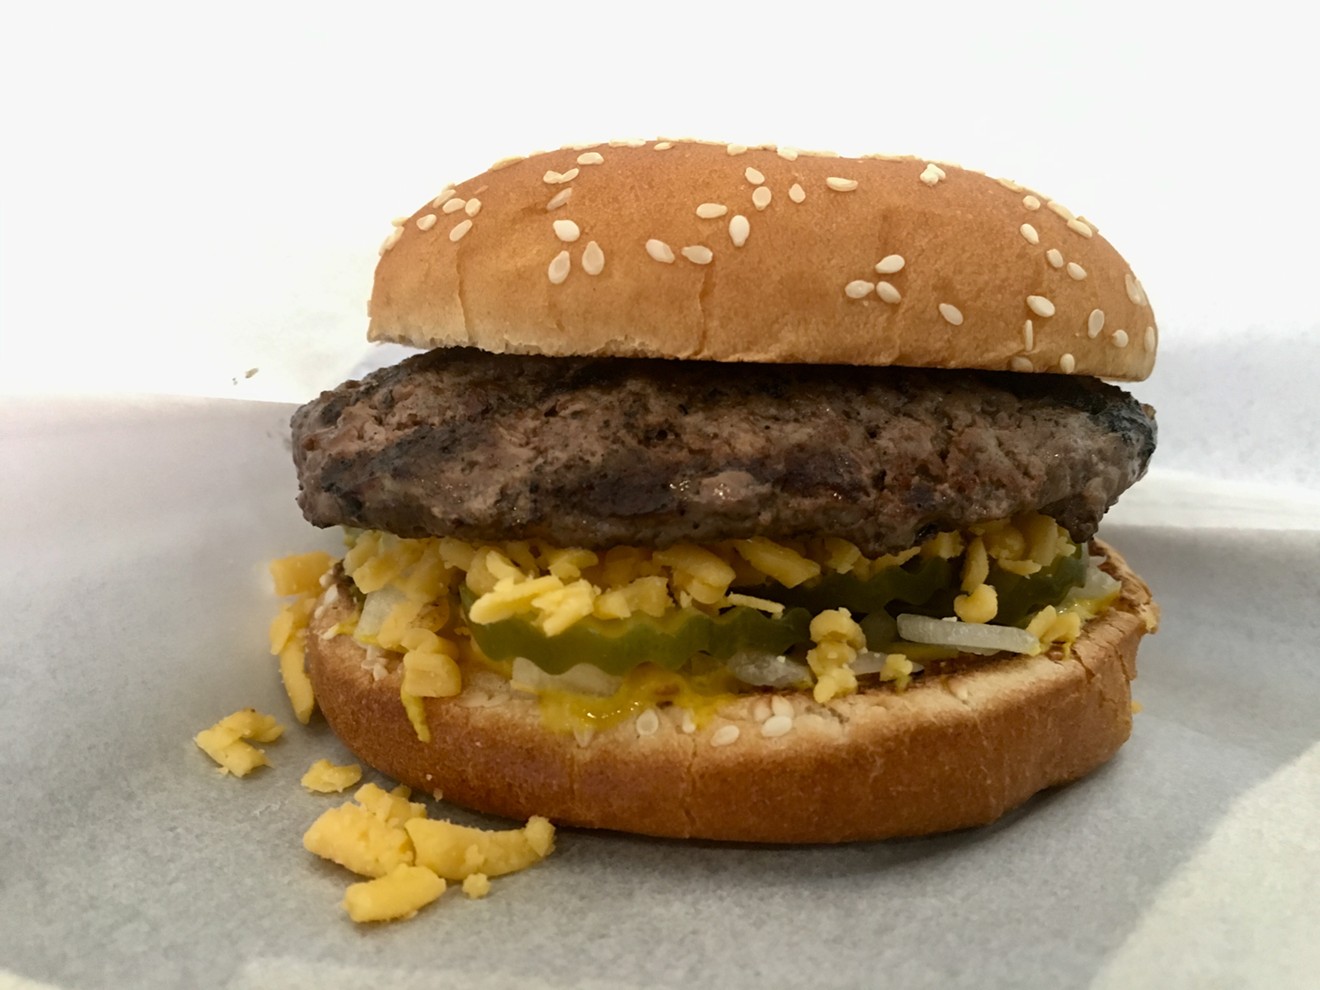 Shredded cheese, loaded over pickles on the bottom bun, melts under a well done choice Angus beef patty. ($4.75)